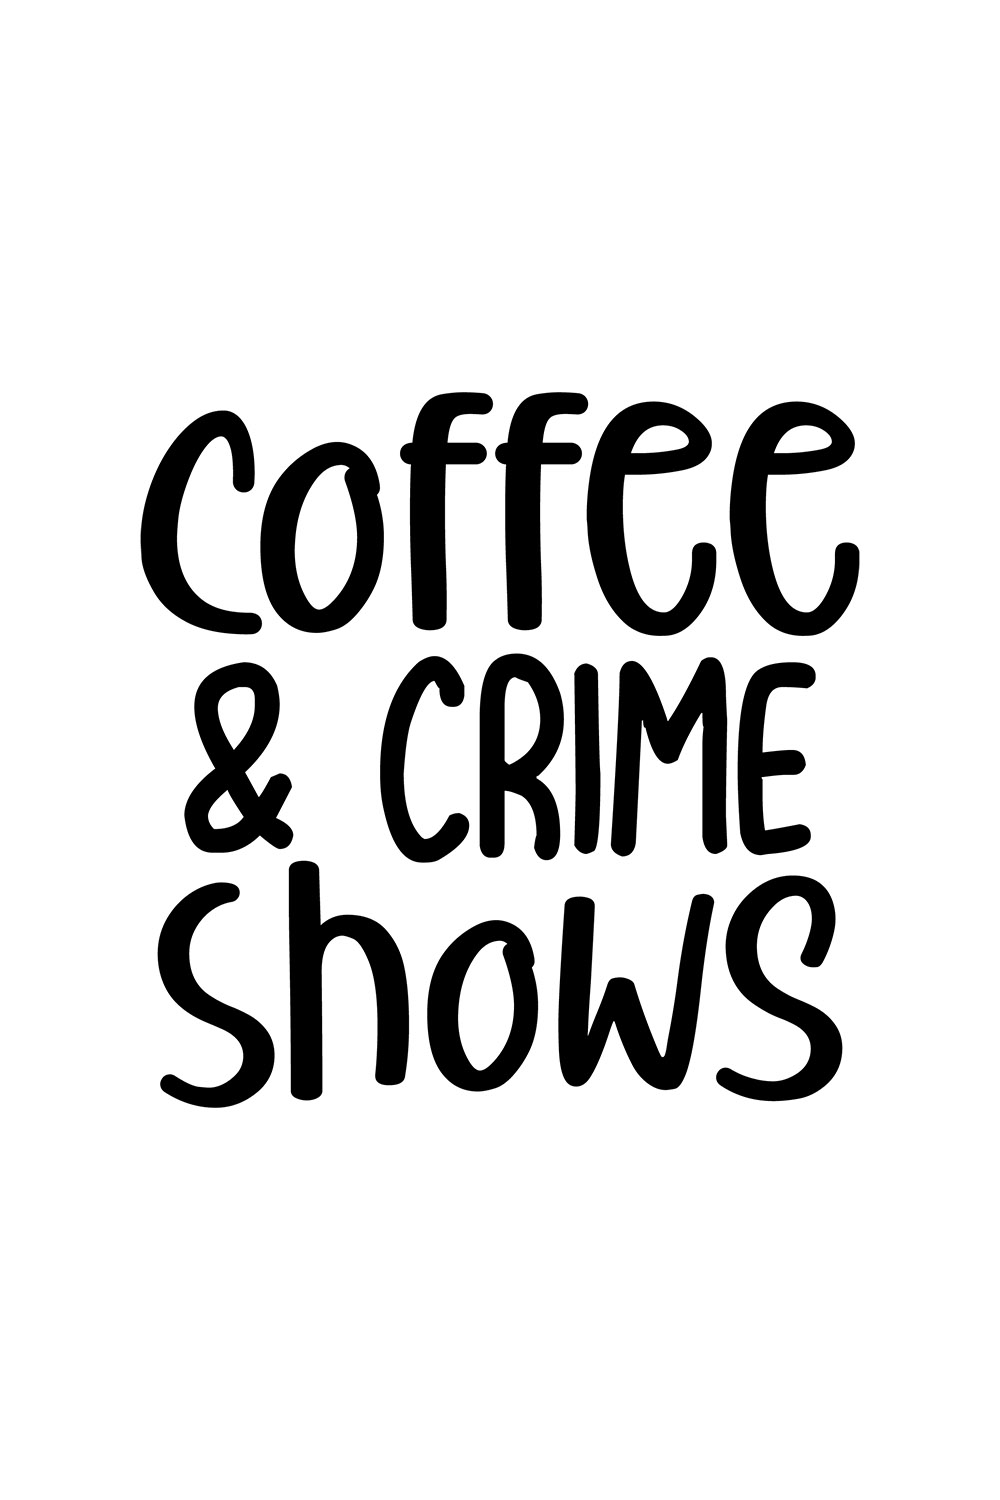 Image with wonderful black lettering for Coffee & Crime Shows prints.